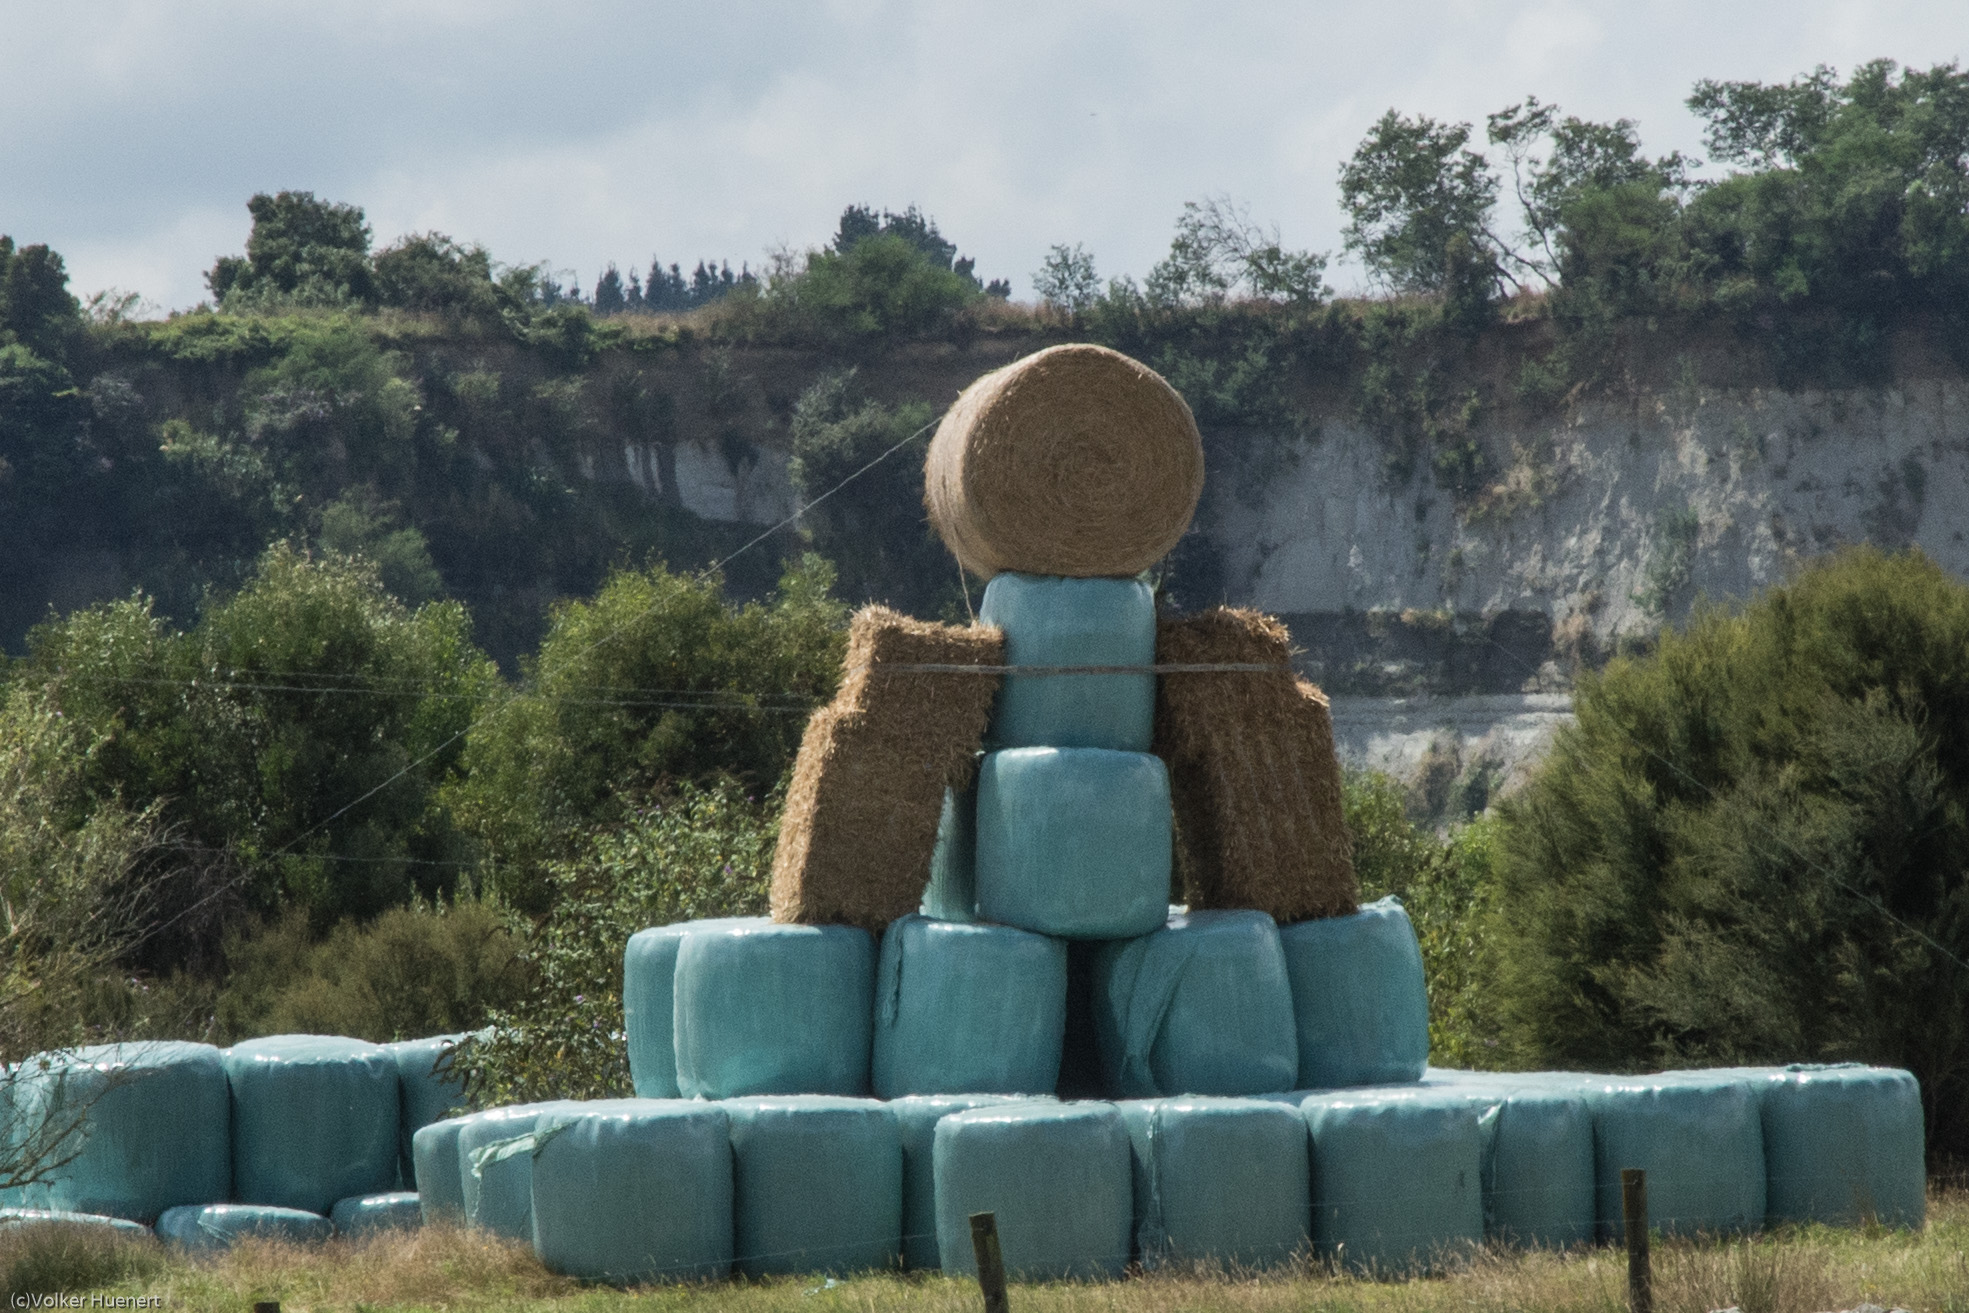 a stack of hay and silage bales are formed to shape a person, with stunning white cliffs and green trees in the background